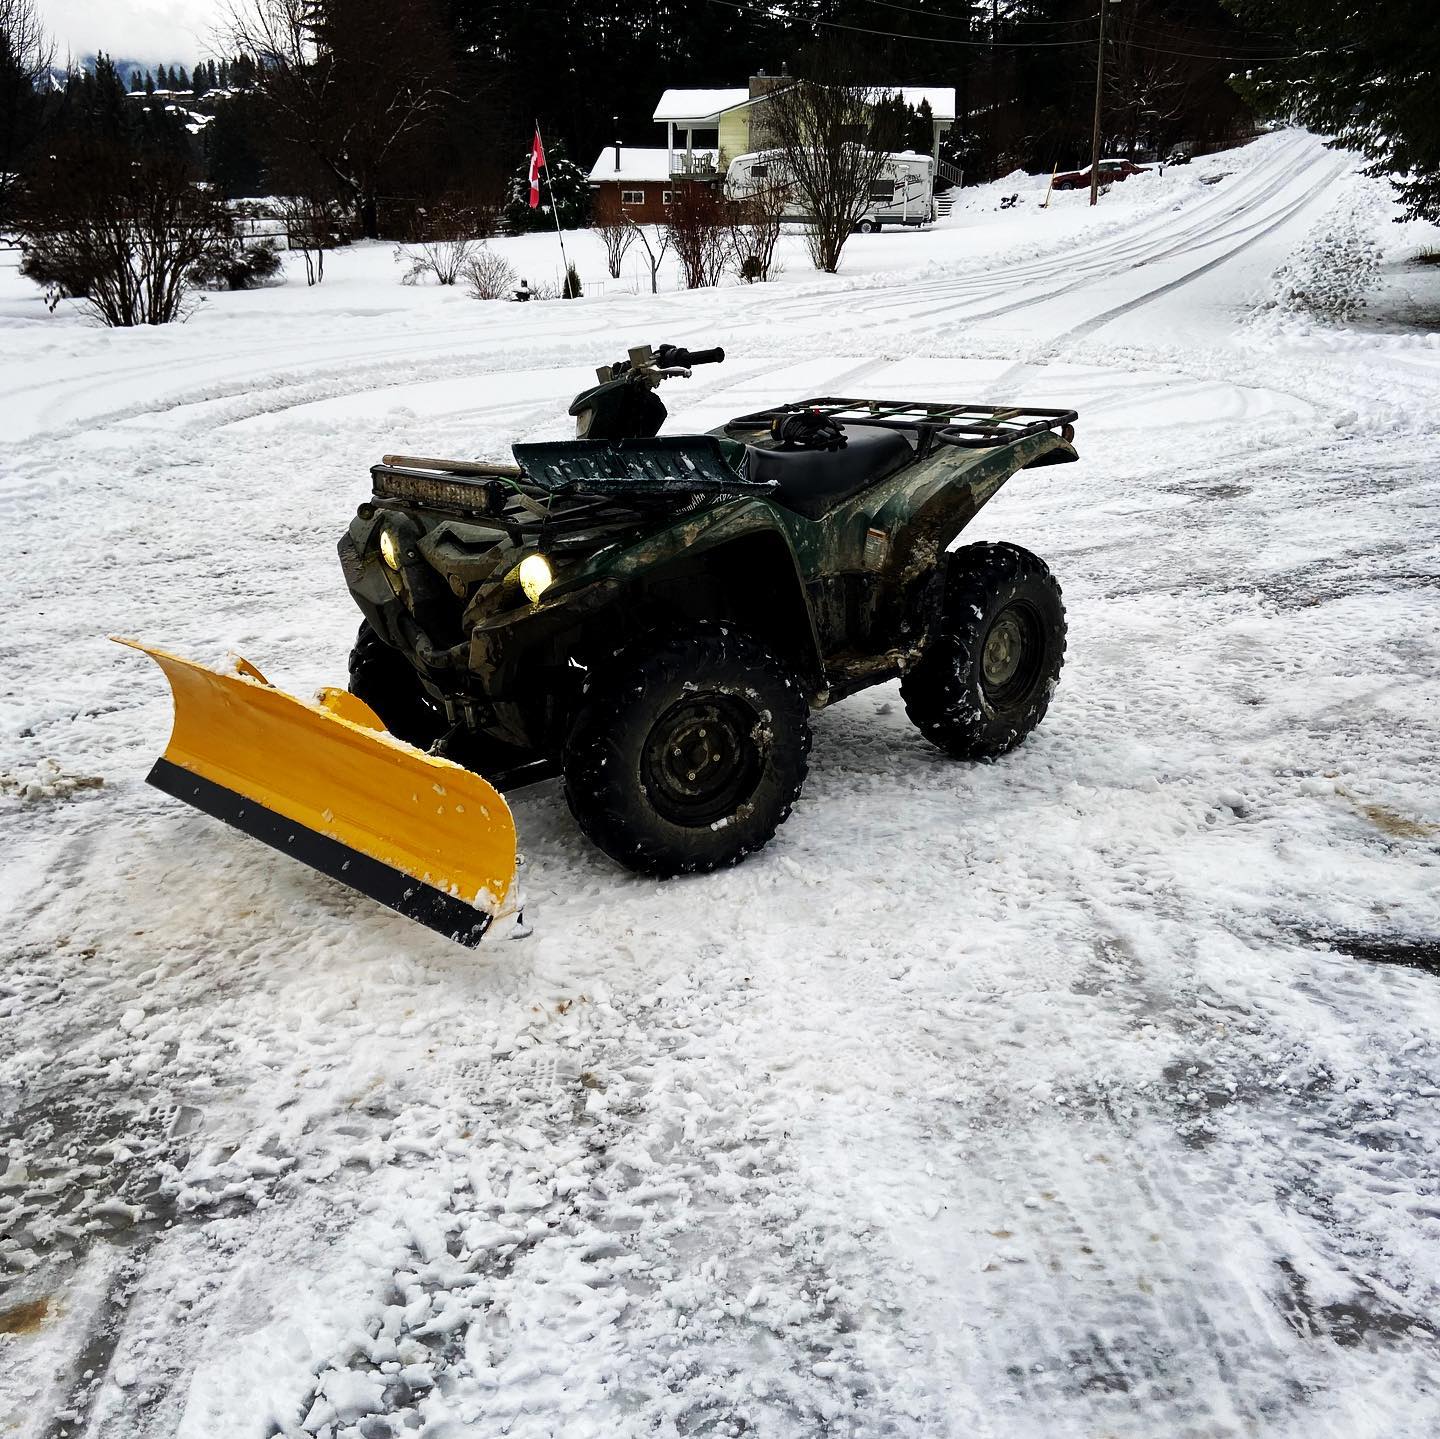 Shuswap Business Solutions: Shuswap Business Solutions offers many services. Snow Removal, Lawn Maintenance, Hot Shot Delivery, Off Road Recovery, Logo Creations and Social Media Management.